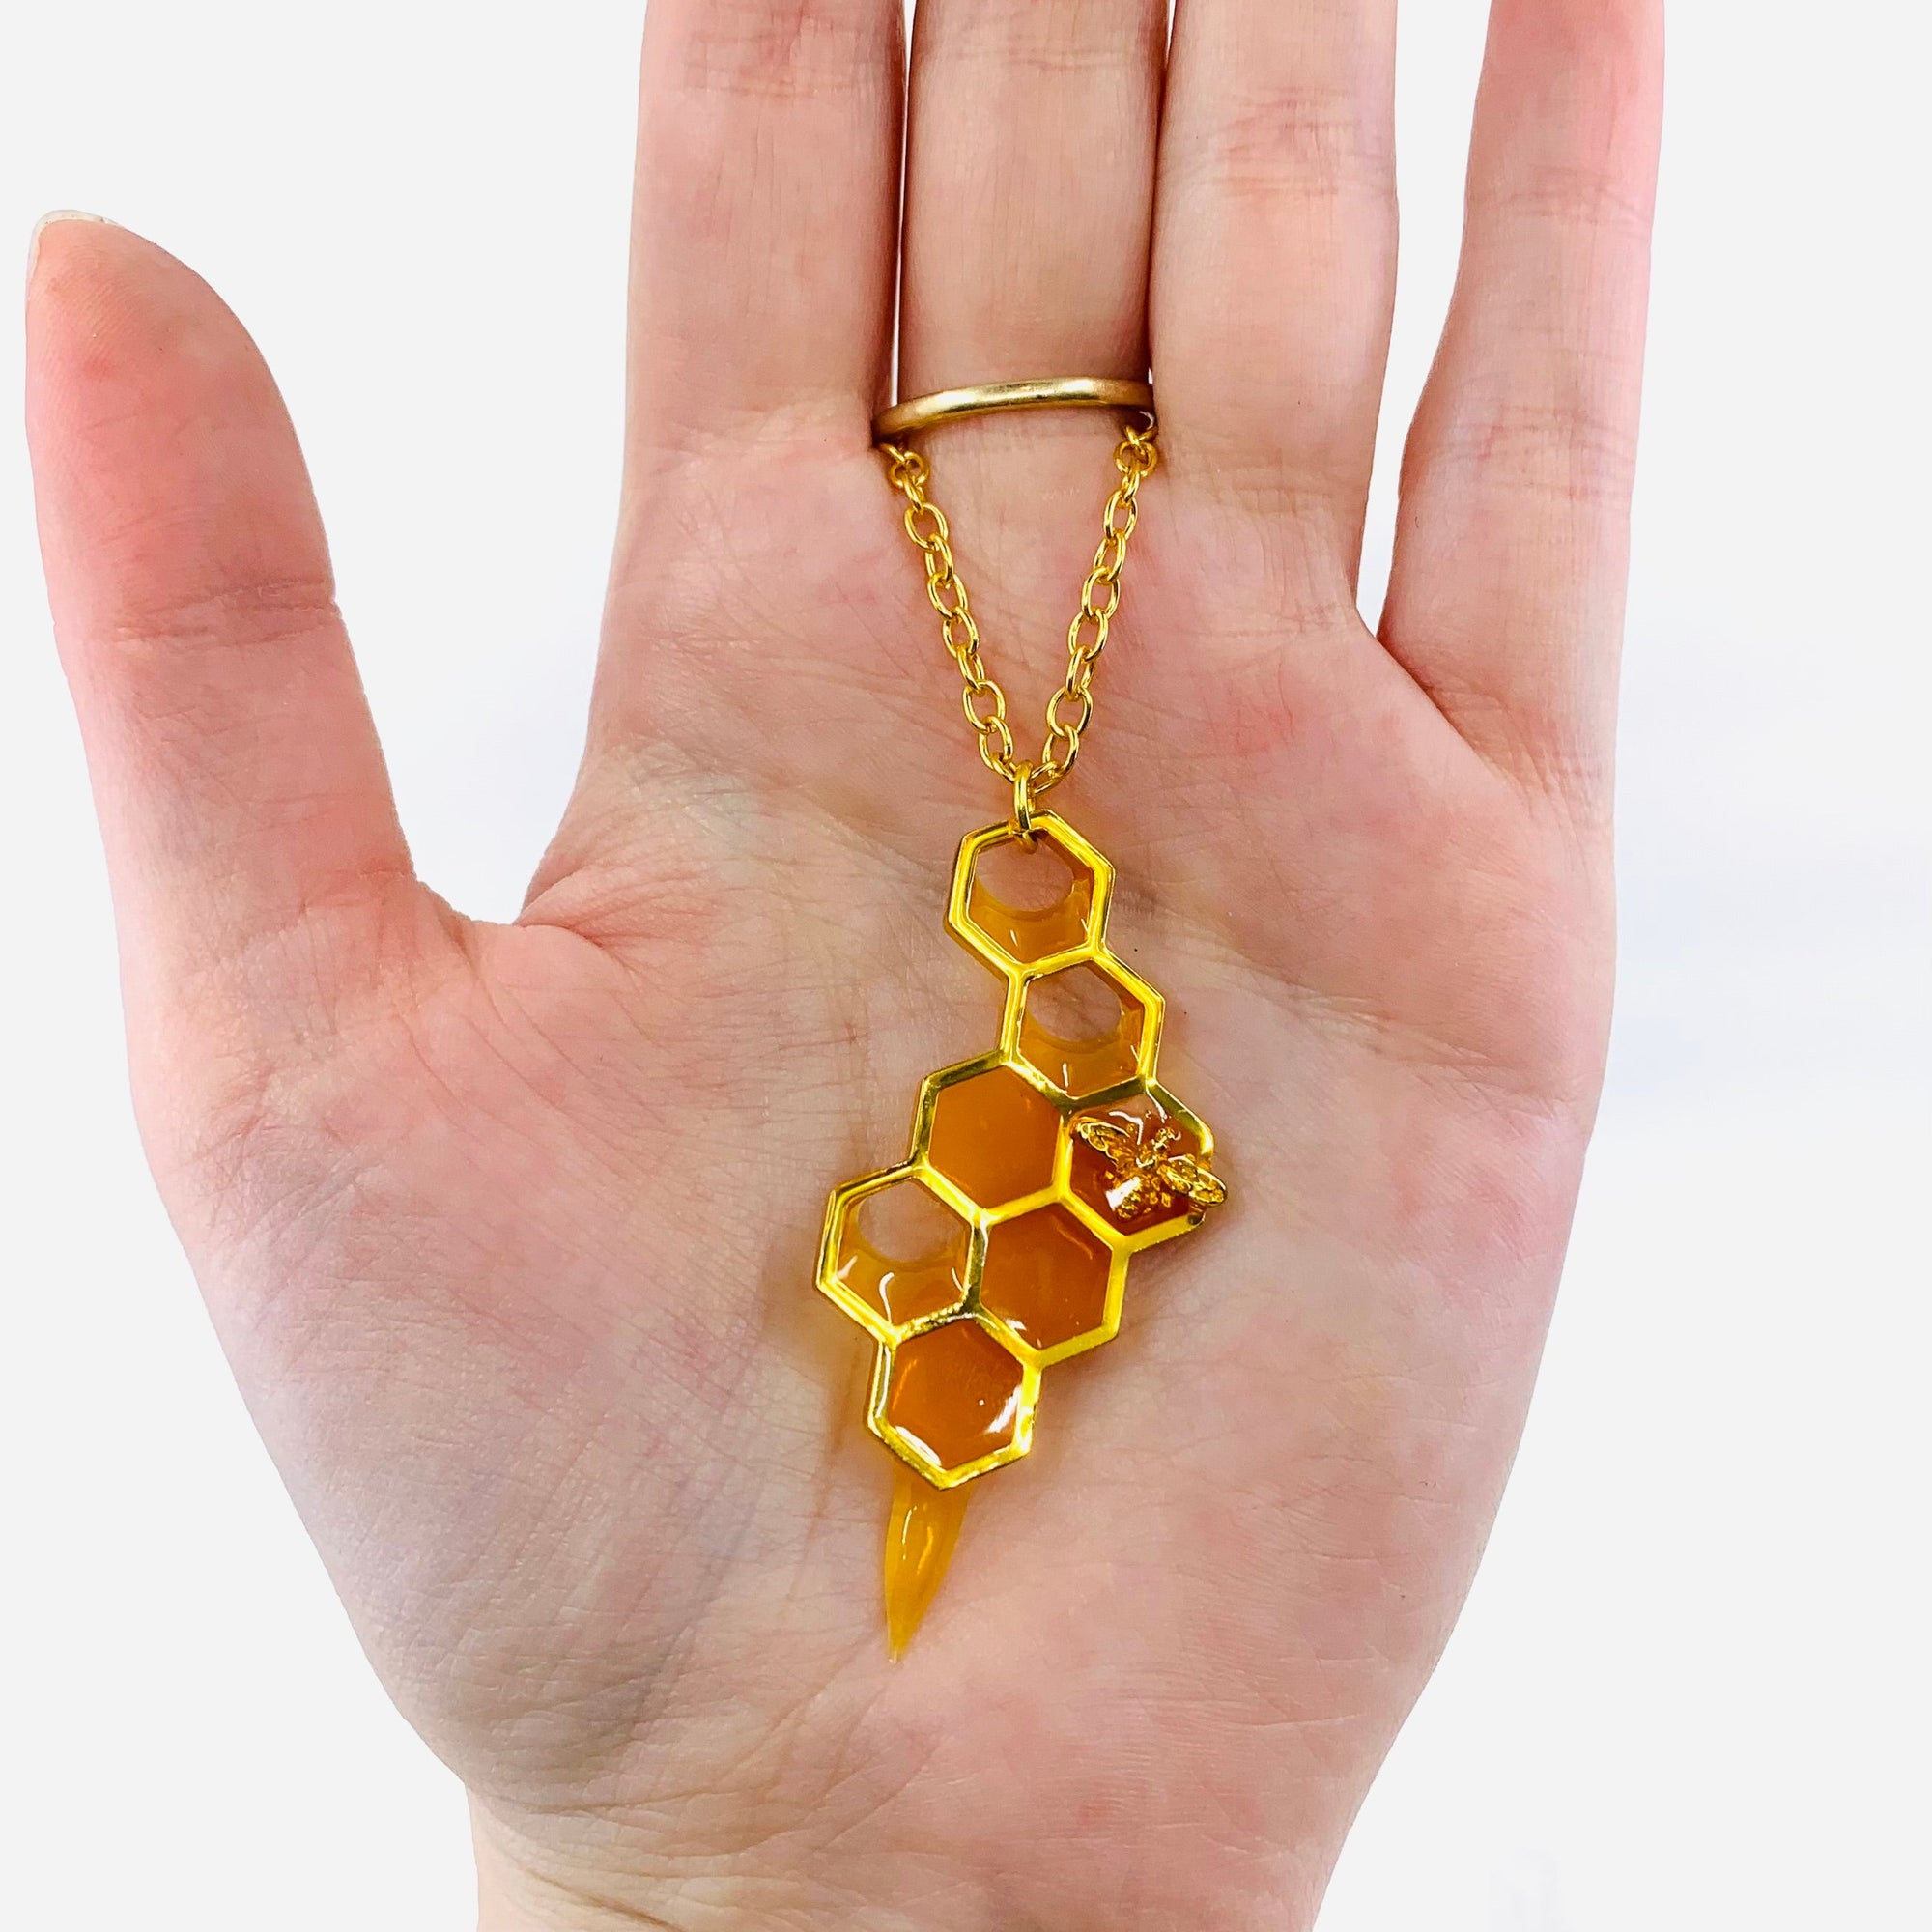 Honeycomb Necklace Manufactured Overseas 